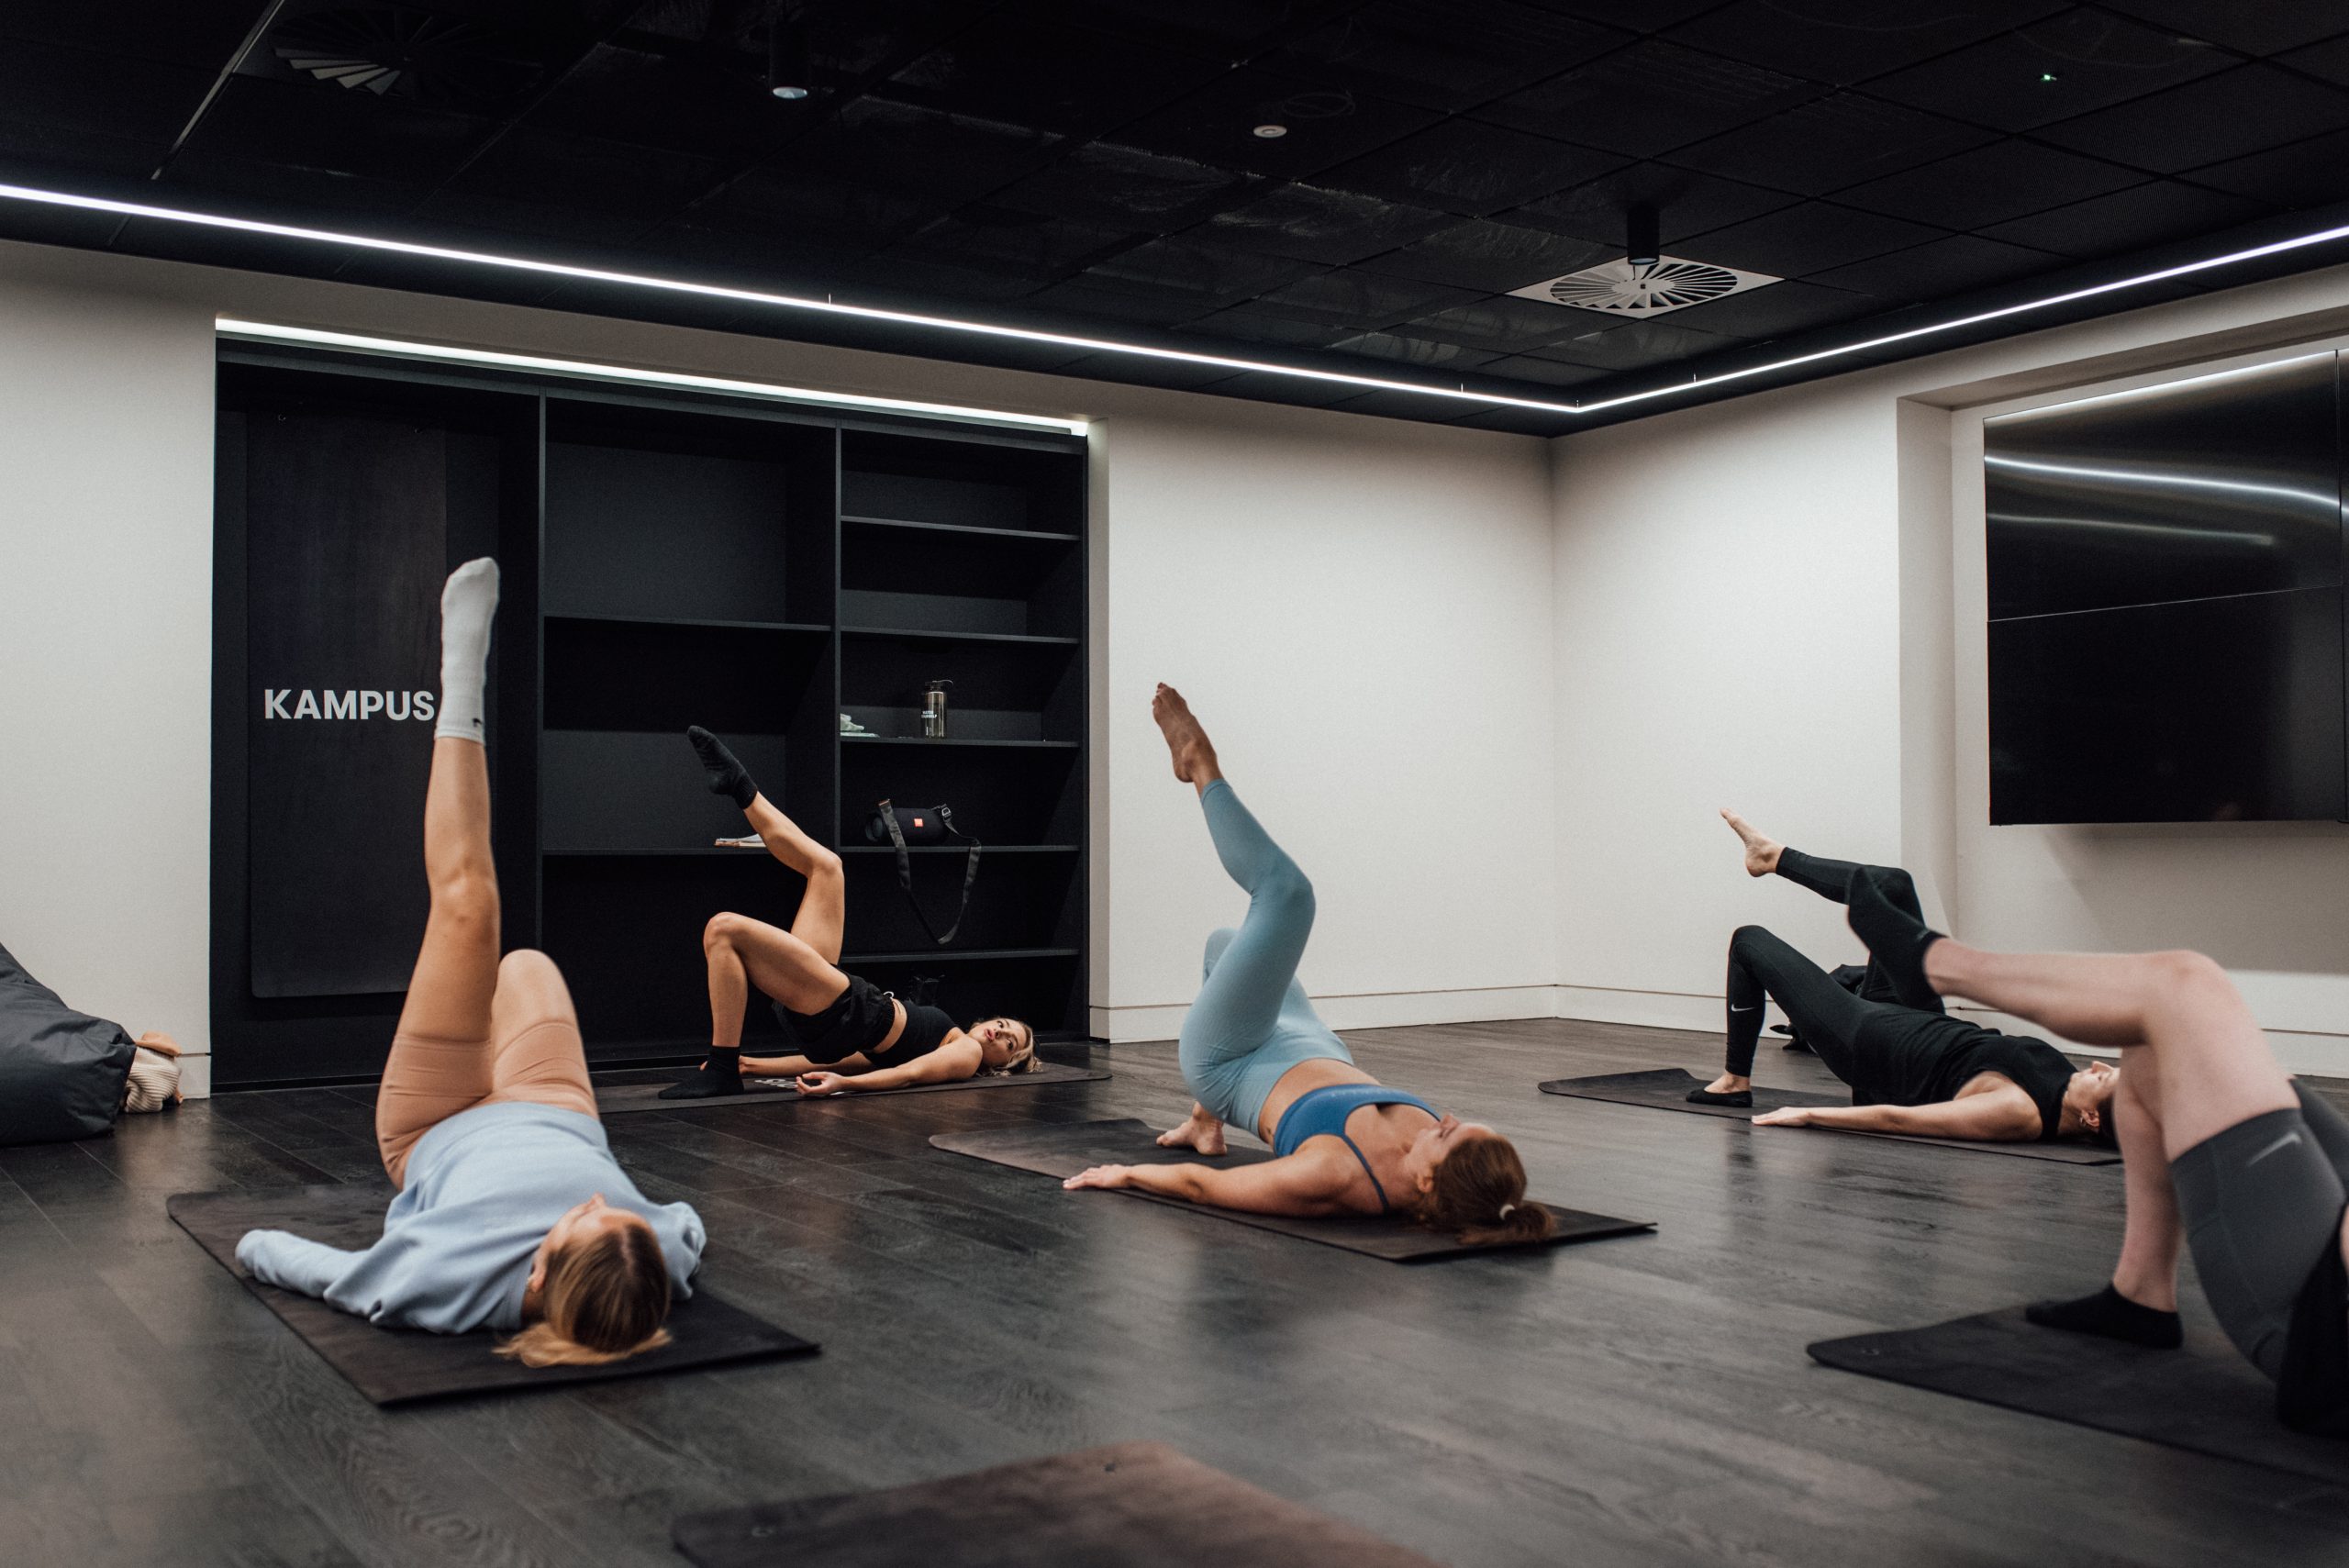 A group yoga session inside the Kampus gym